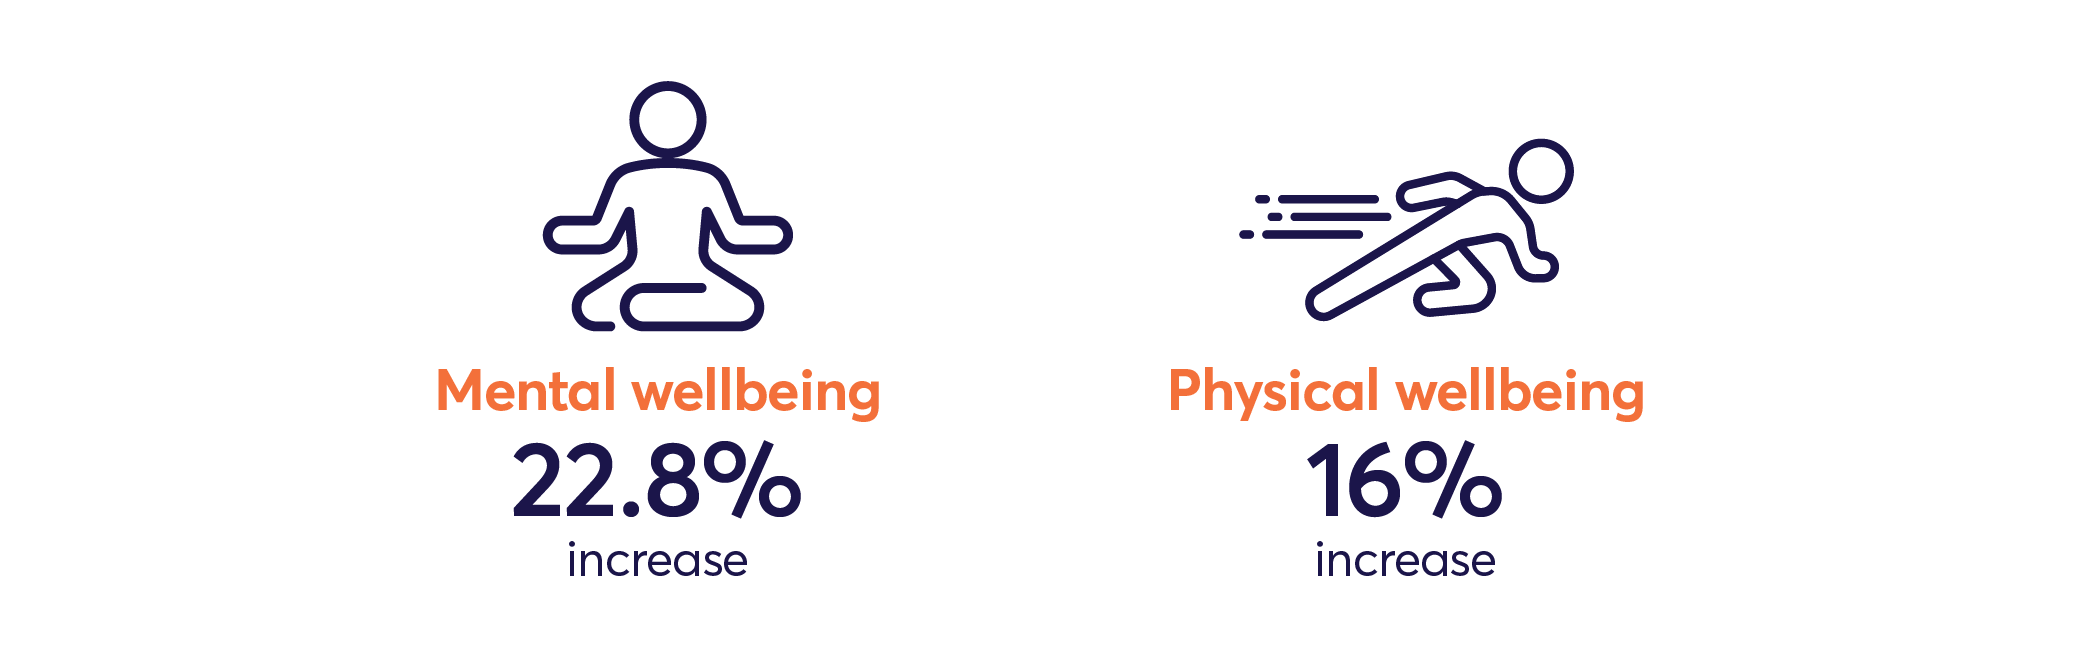 Mental wellbeing and Physical wellbeing infographic